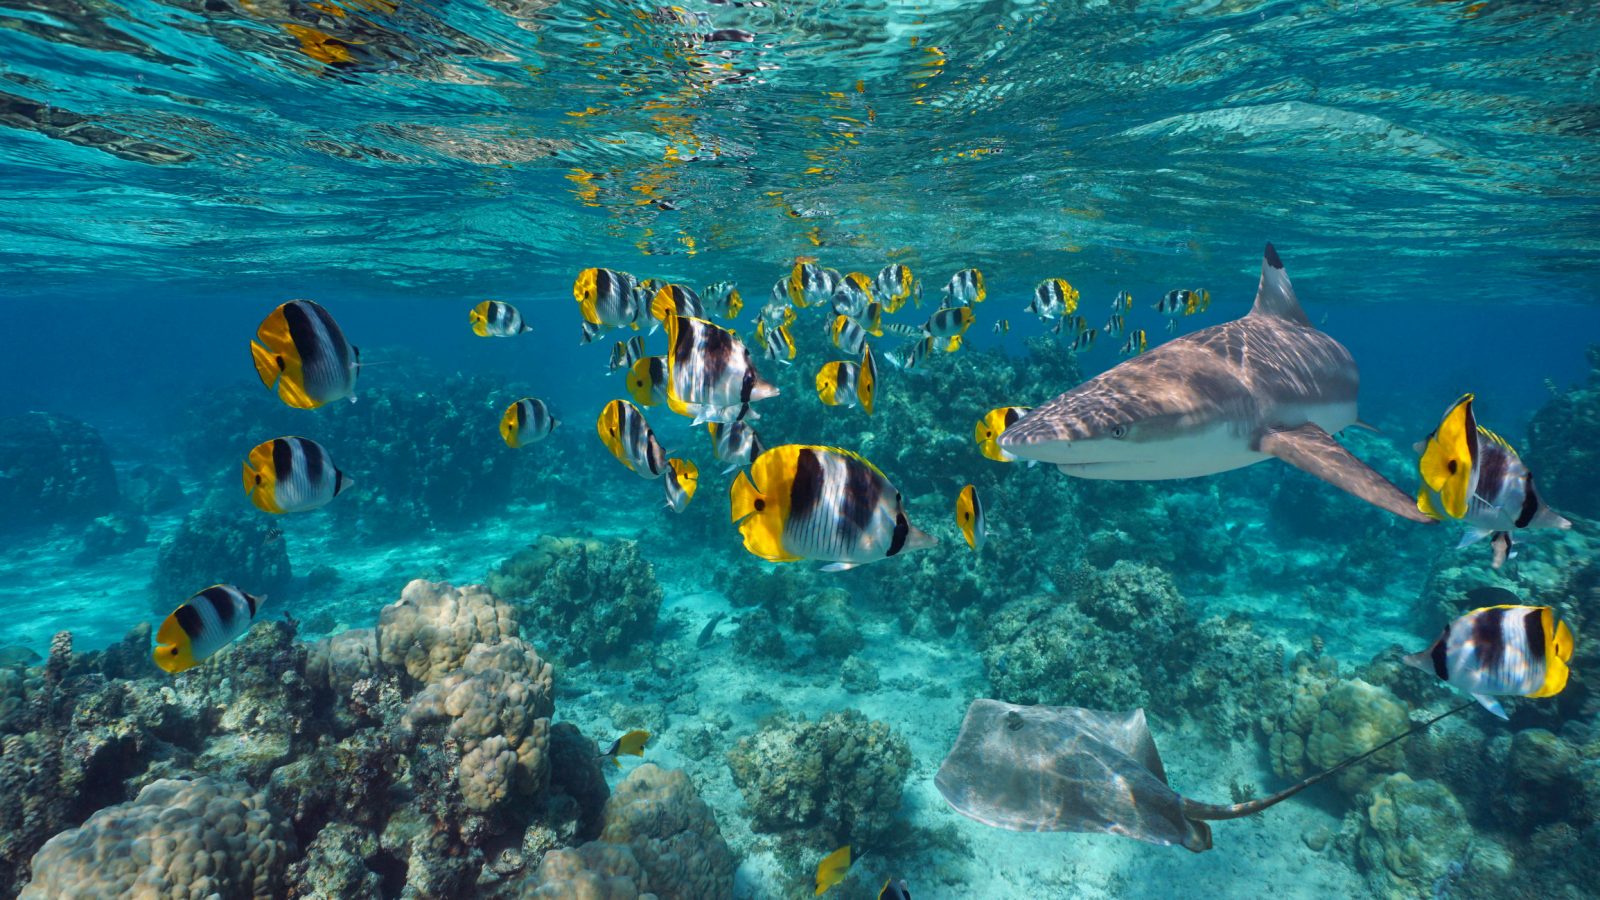 Striped tropical fish, a stingray and a shark swim amongst coral underwater.